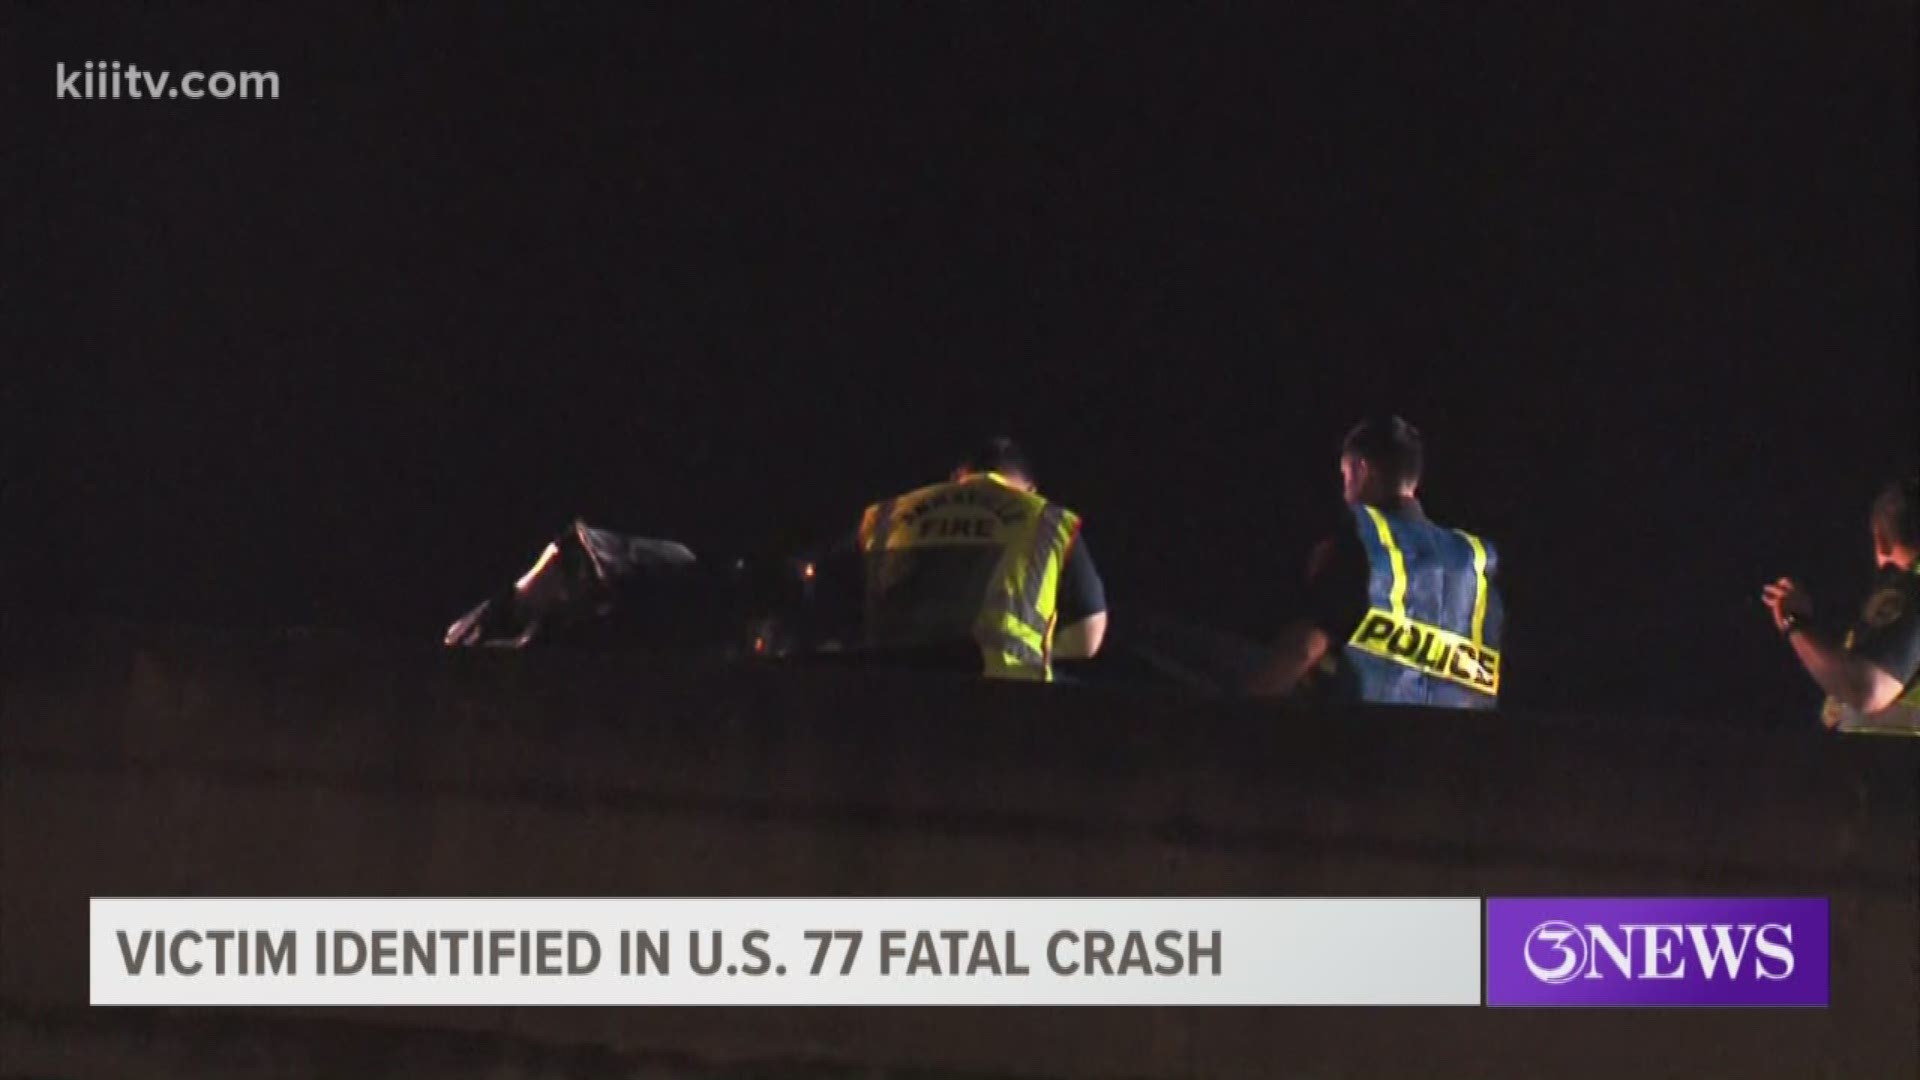 The Robstown Police Department said 21-year-old Nicholas Tovar of Corpus Christi was killed in a crash involving an 18-wheeler Wednesday morning on Highway 77 near County Road 44.